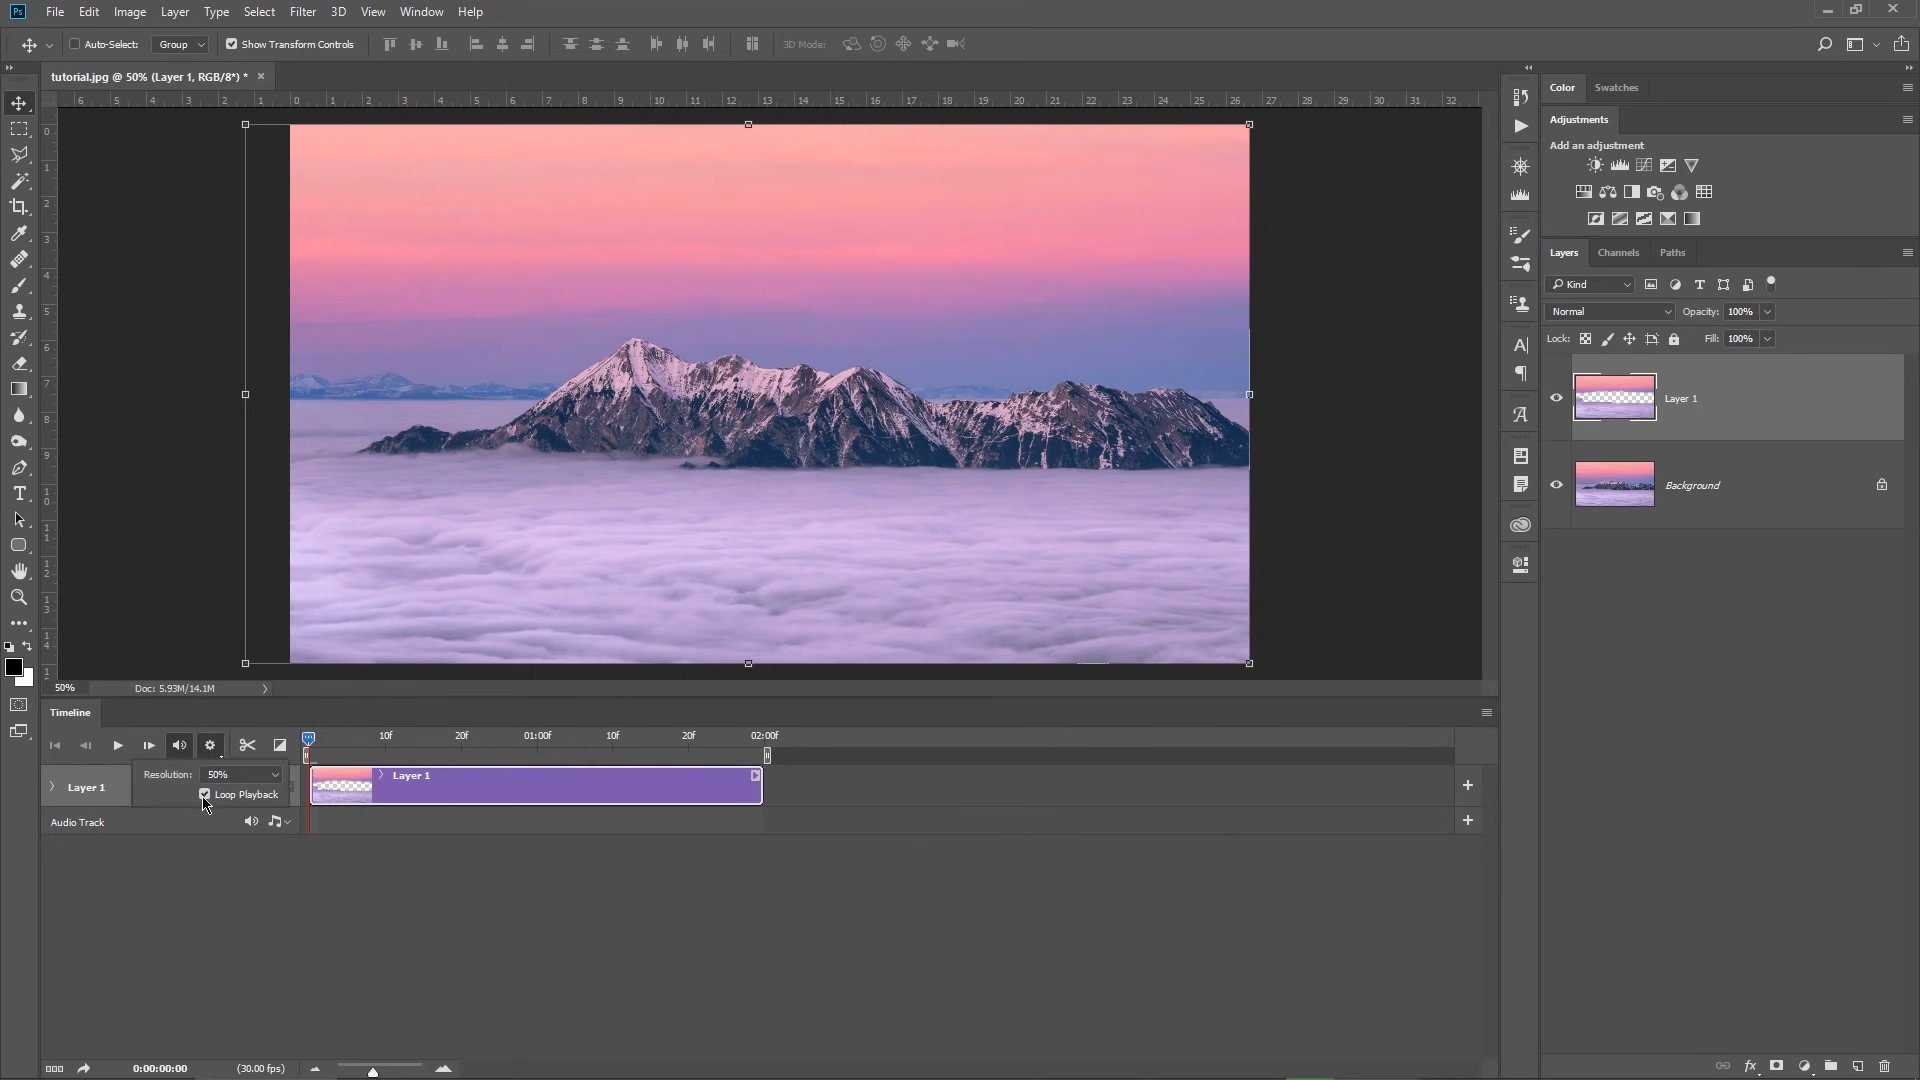 Determining The Length Of Video In Adobe Photoshop